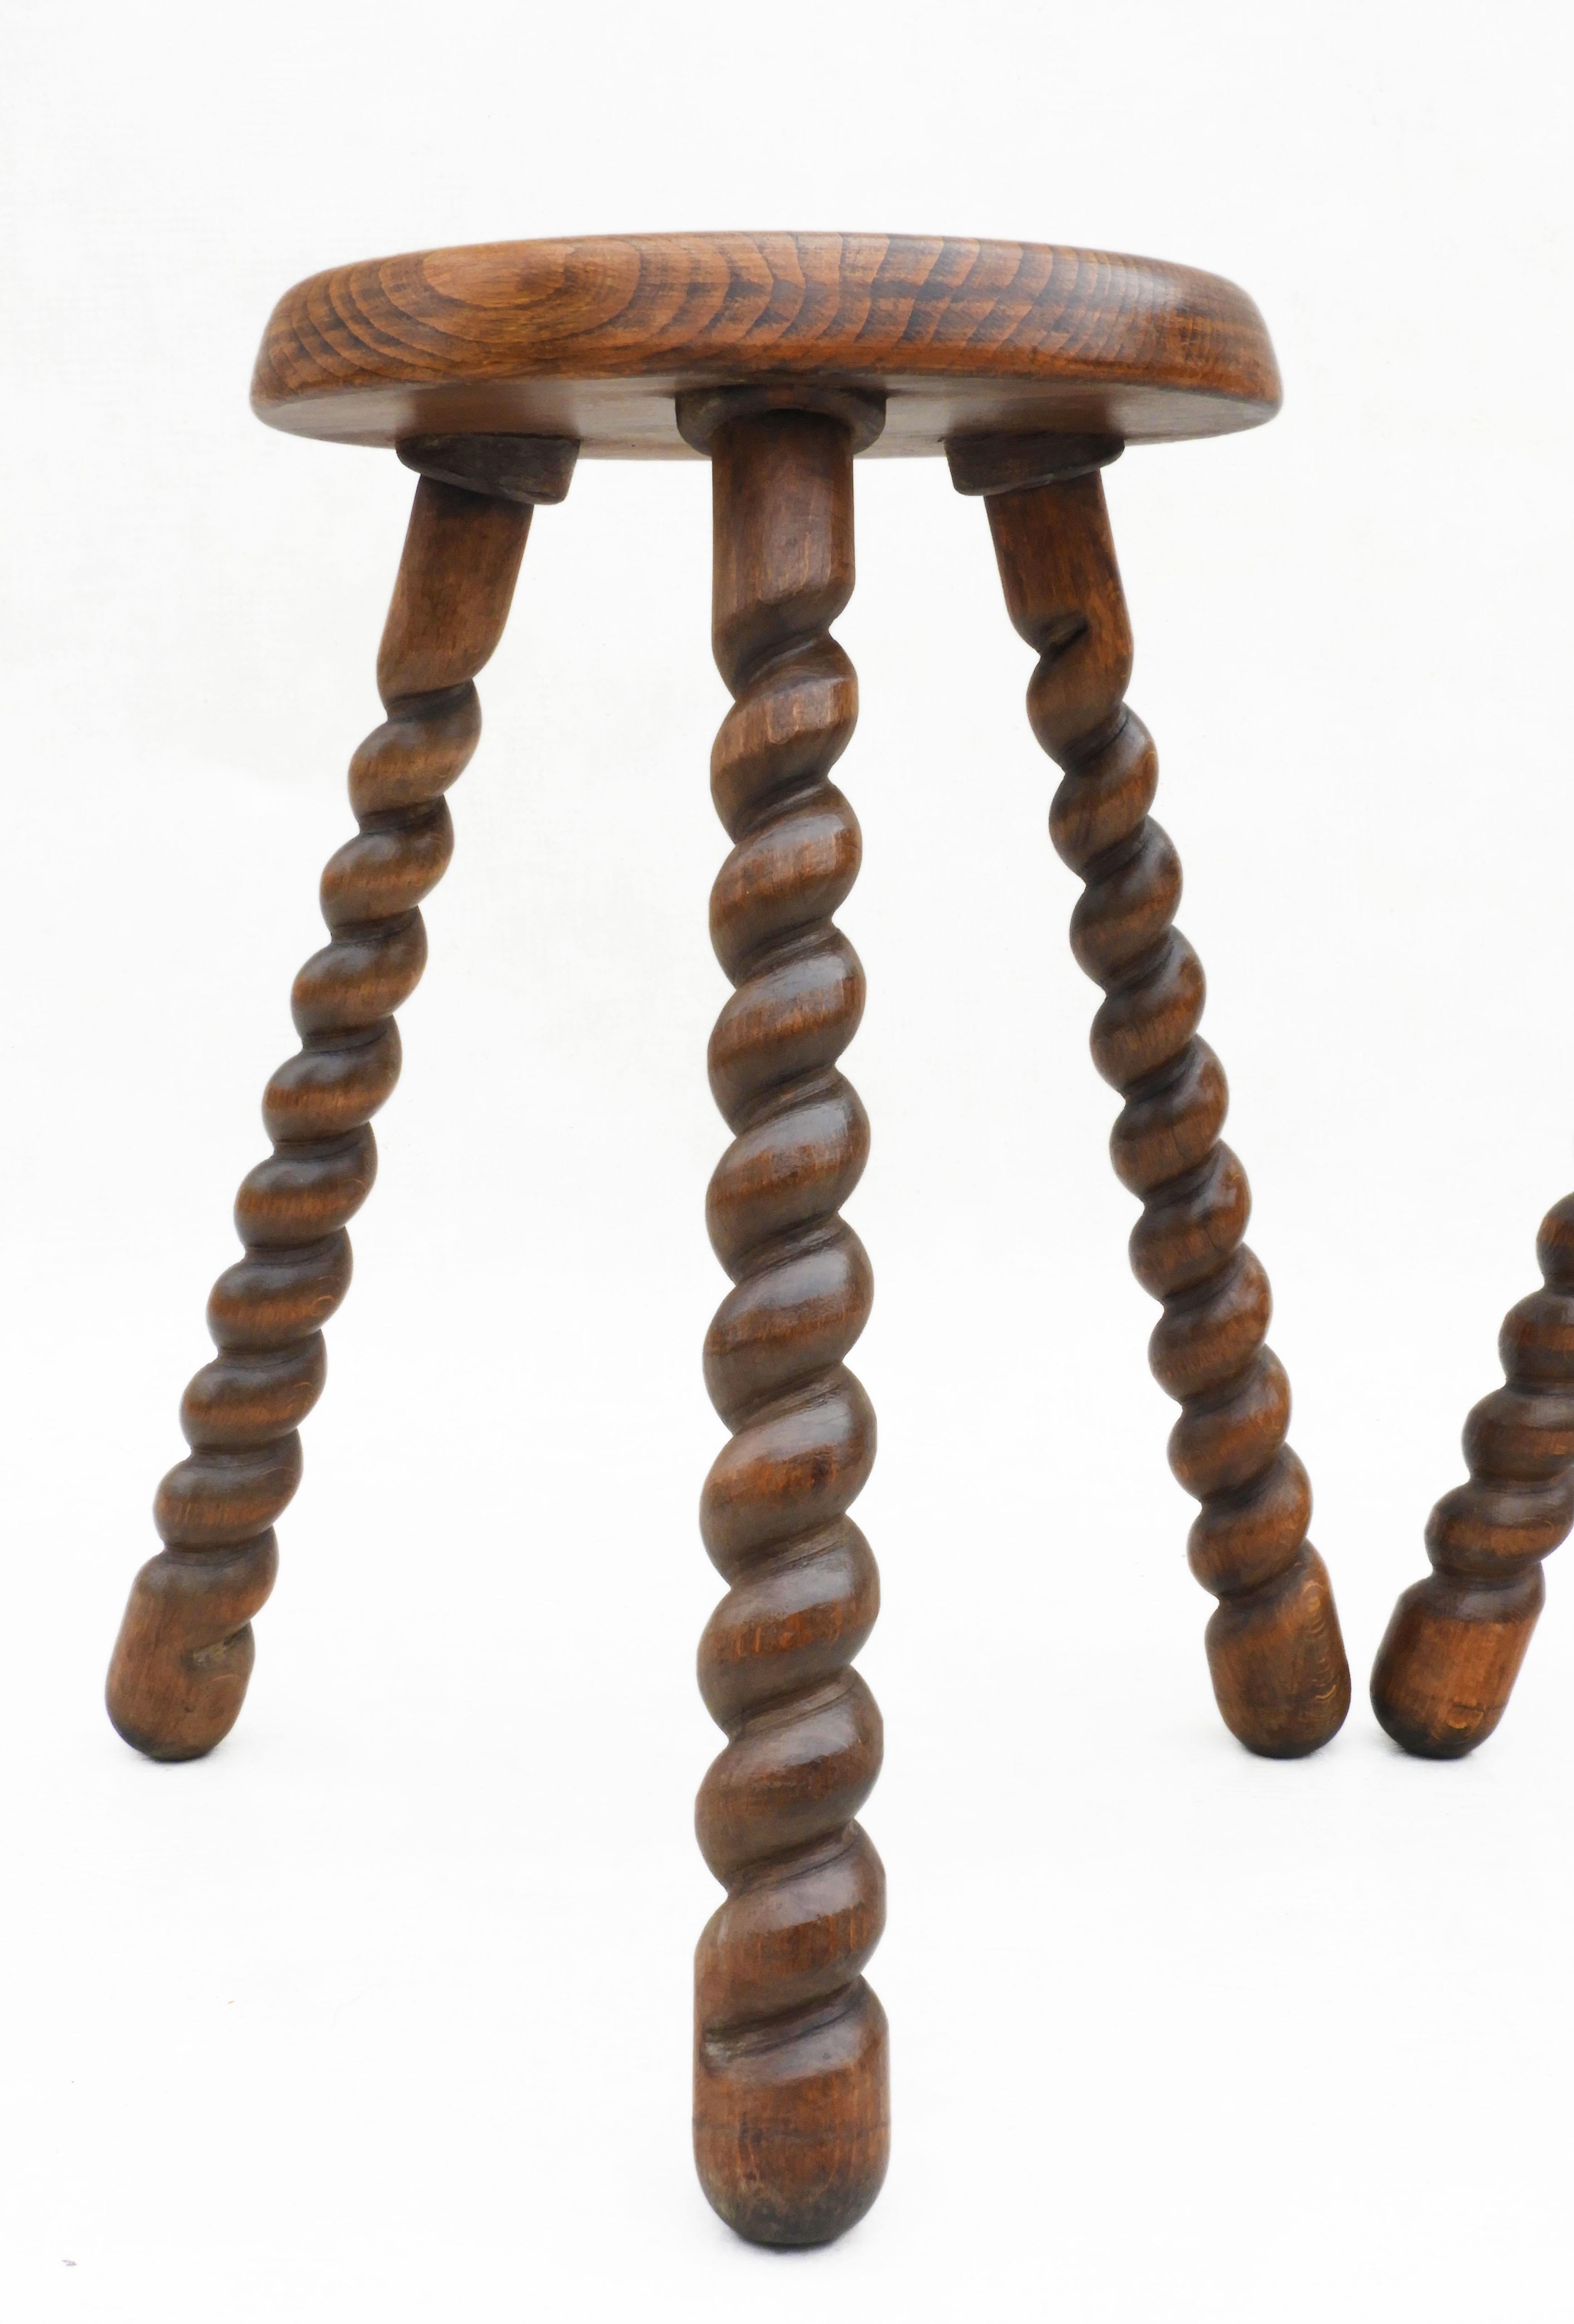 Pair of Basque Folk Art Tripod Stools c1950 France In Good Condition For Sale In Trensacq, FR